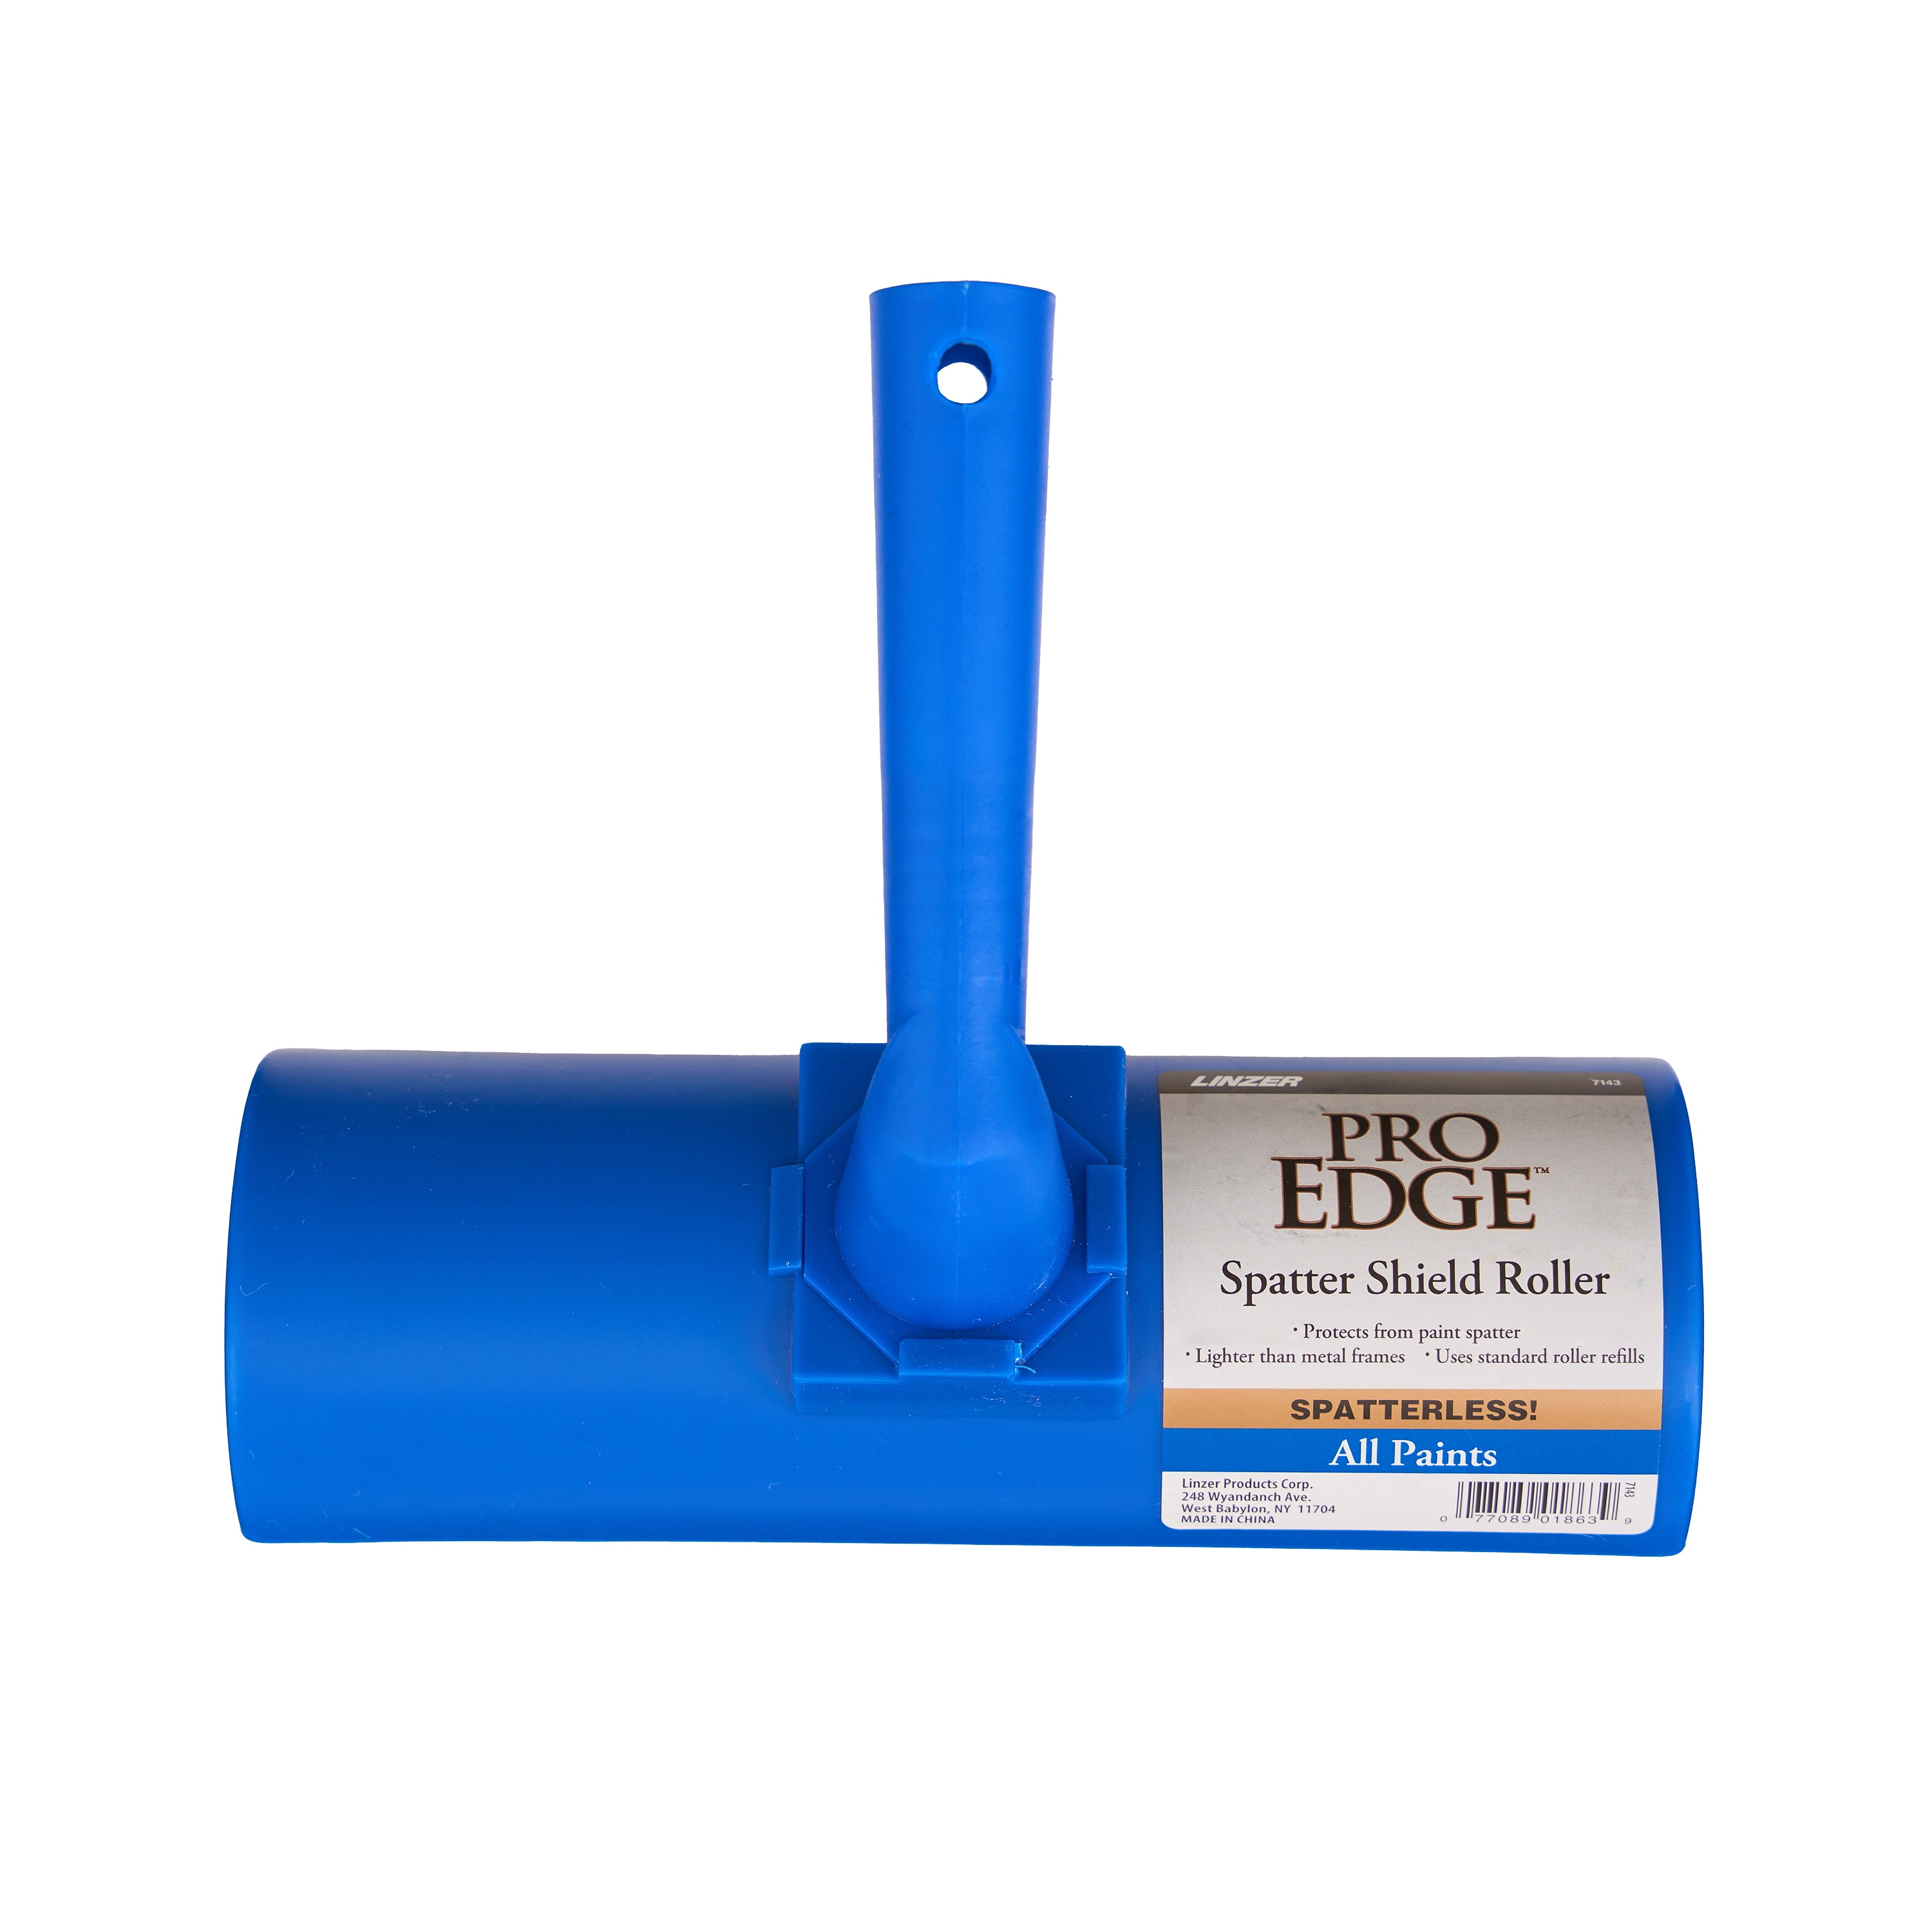 Proedge By Linzer Paint Roller Er With Shield For All Paints Stains Com